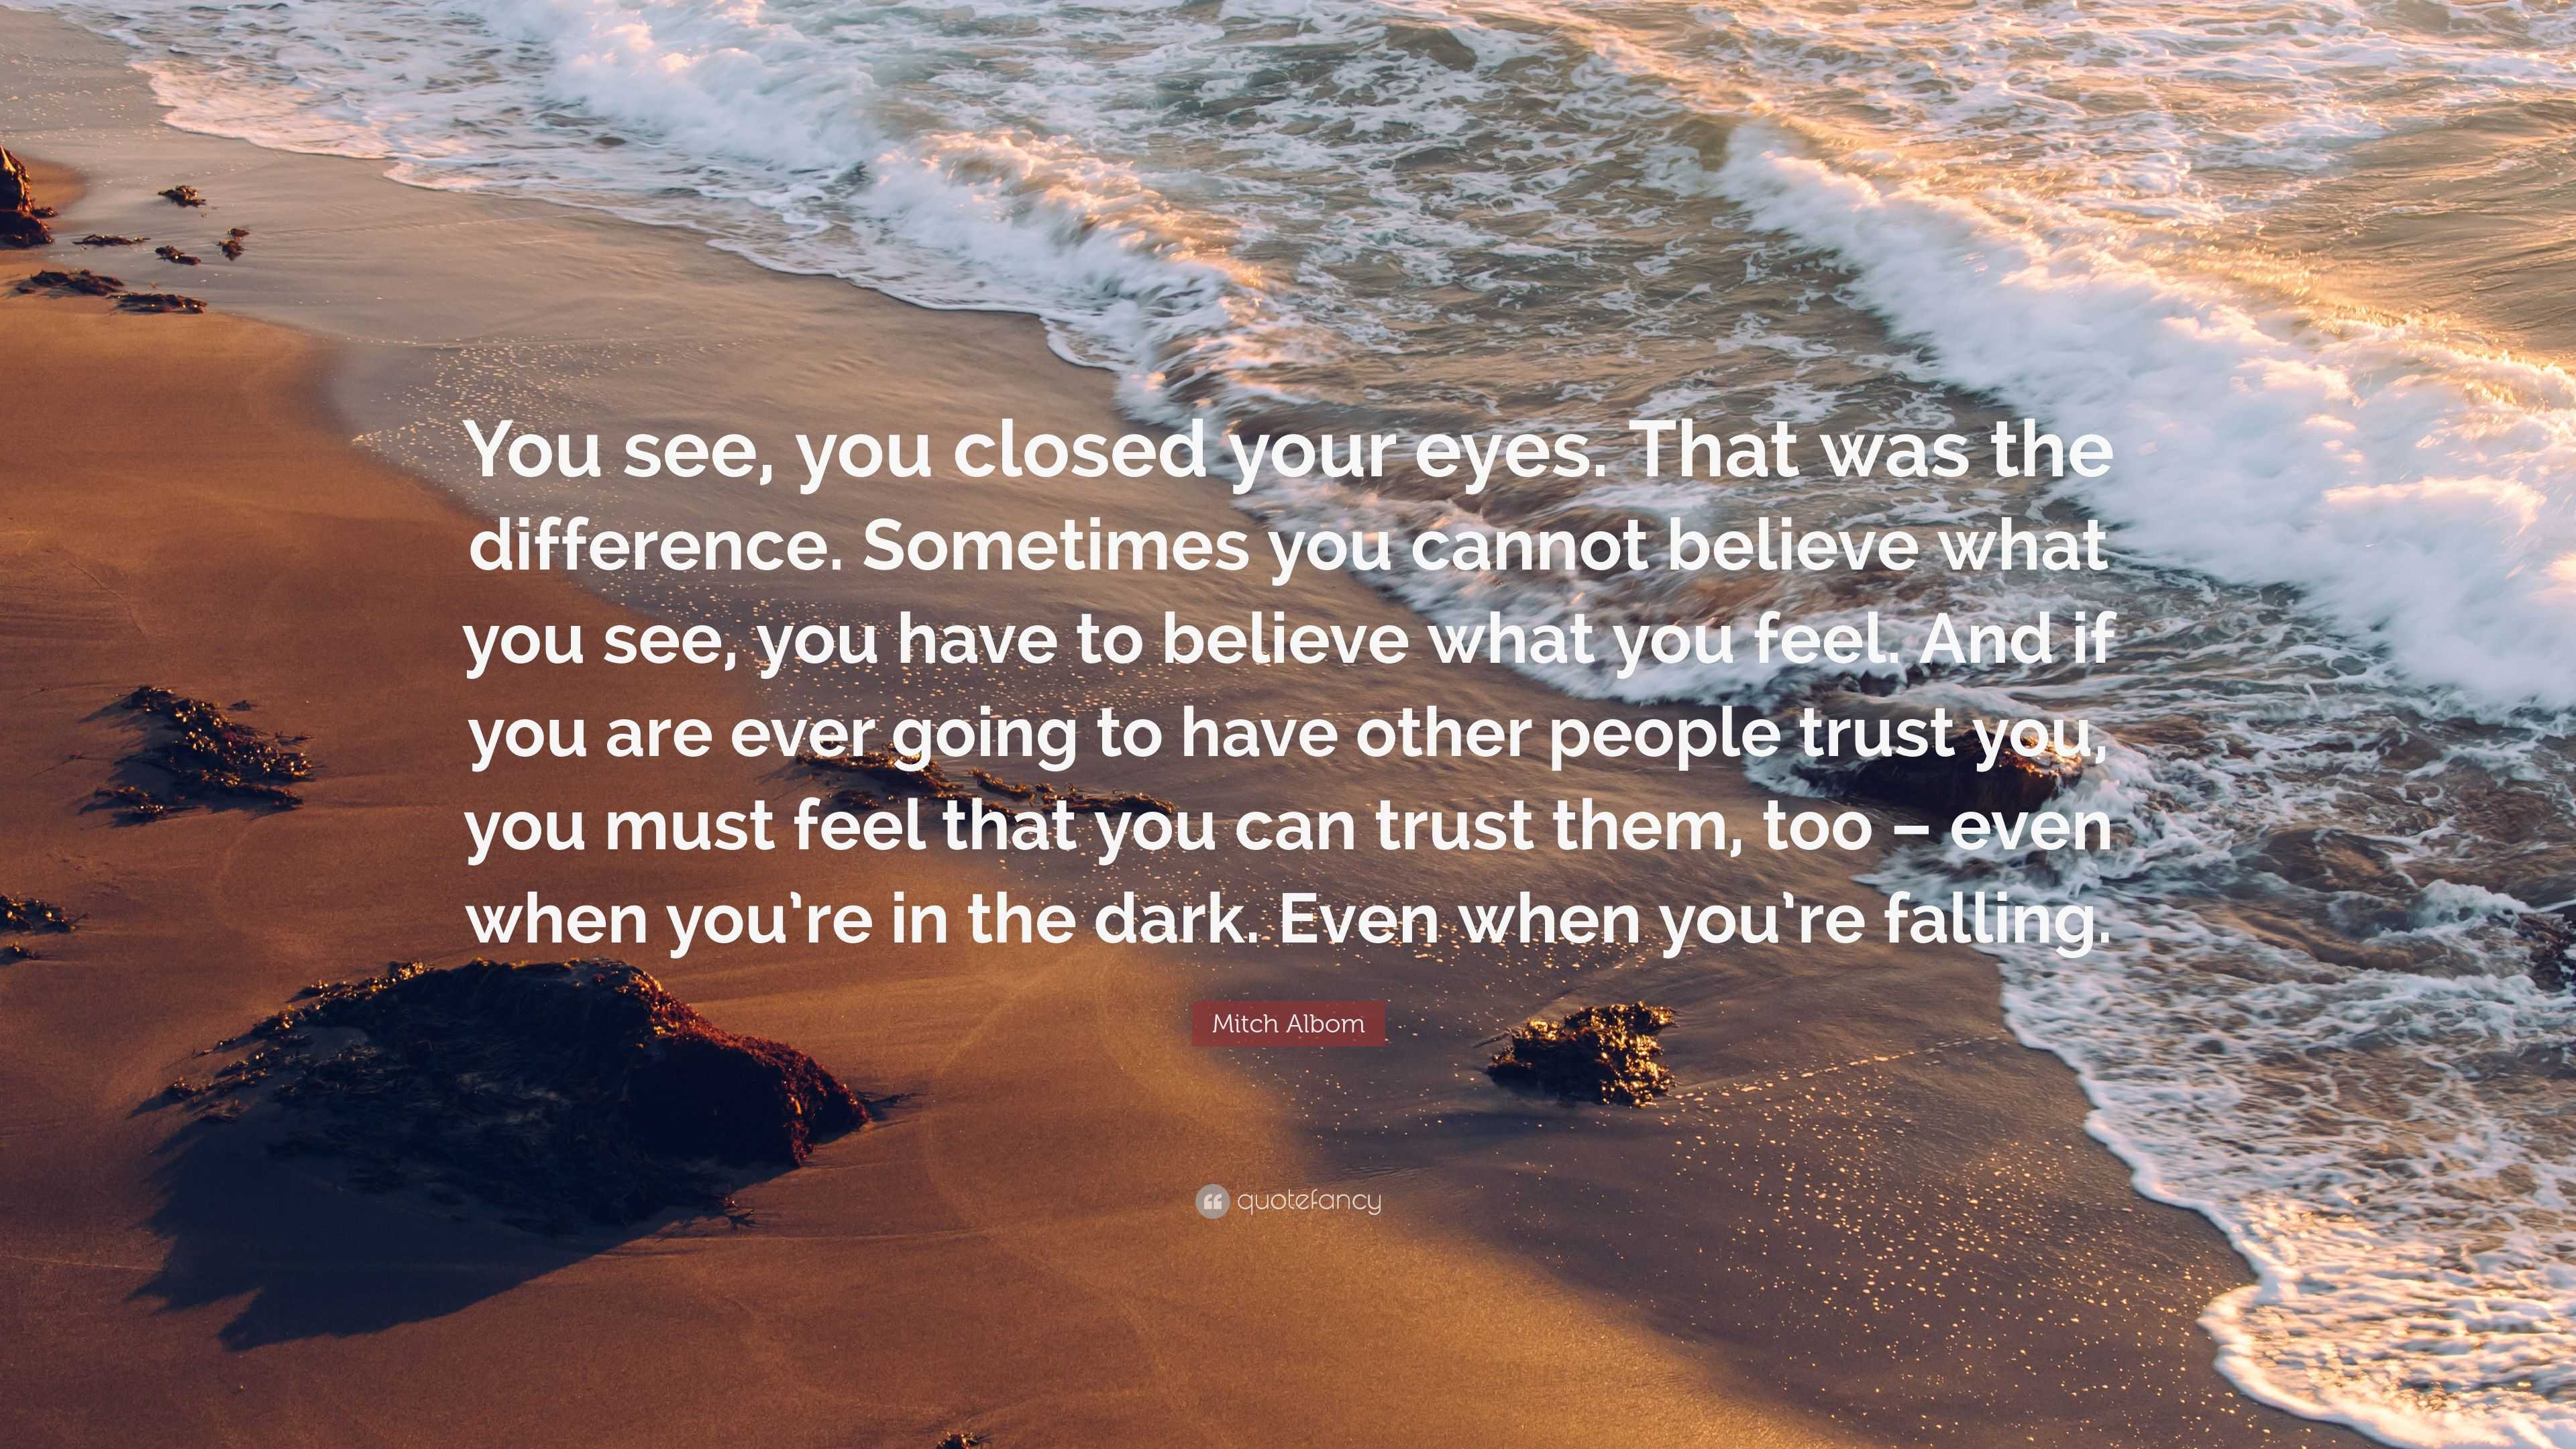 Mitch Albom Quote: “You see, you closed your eyes. That was the ...